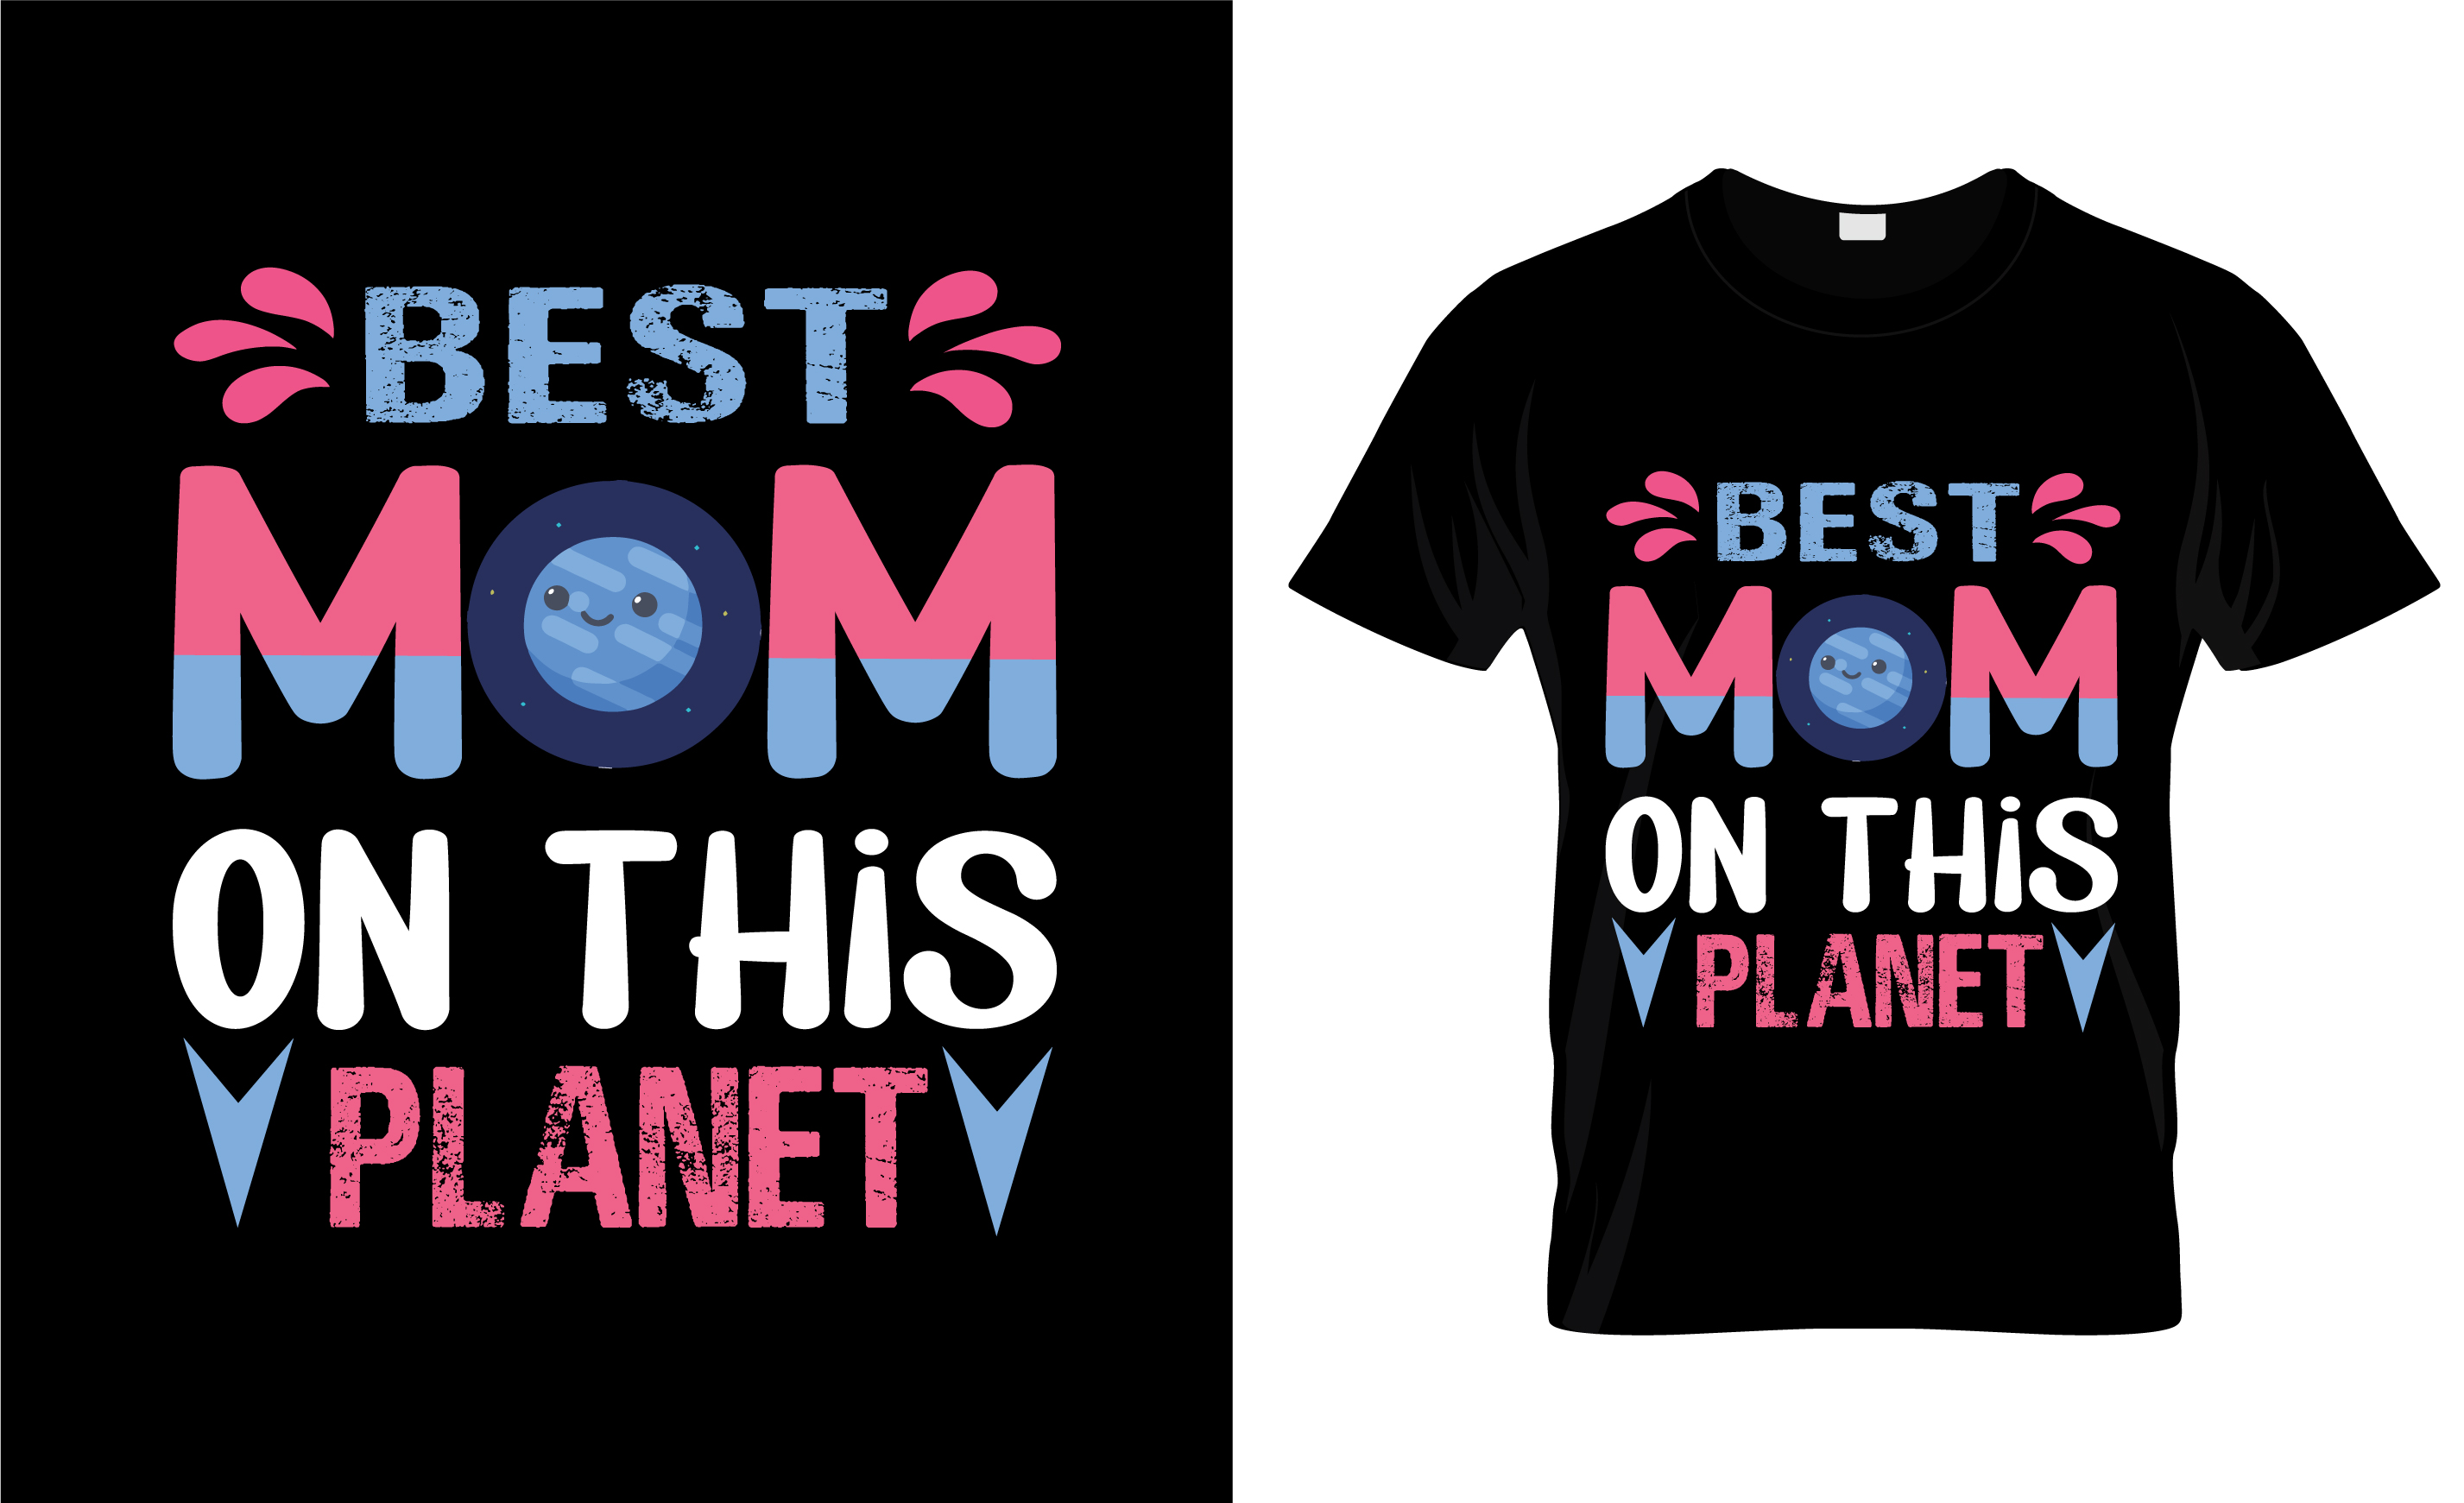 Image of black t-shirt with enchanting print in pink and white and blue about mom.